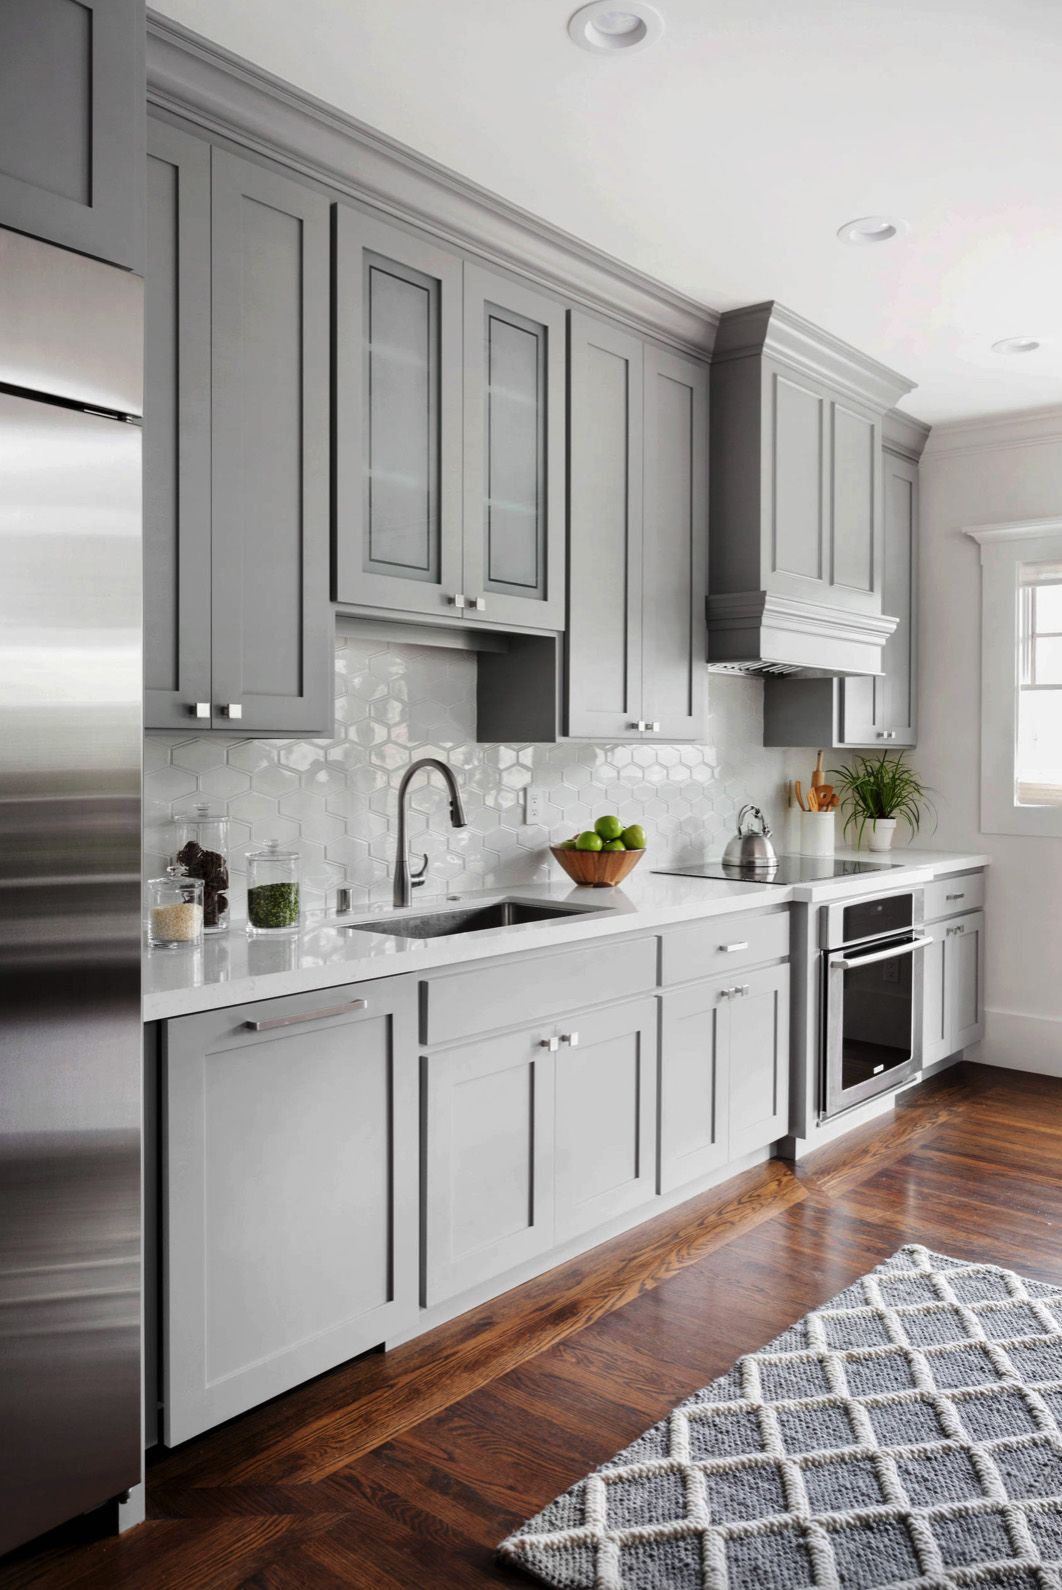 The Gray Kitchen Ideas that Are Brilliant and Inspiring